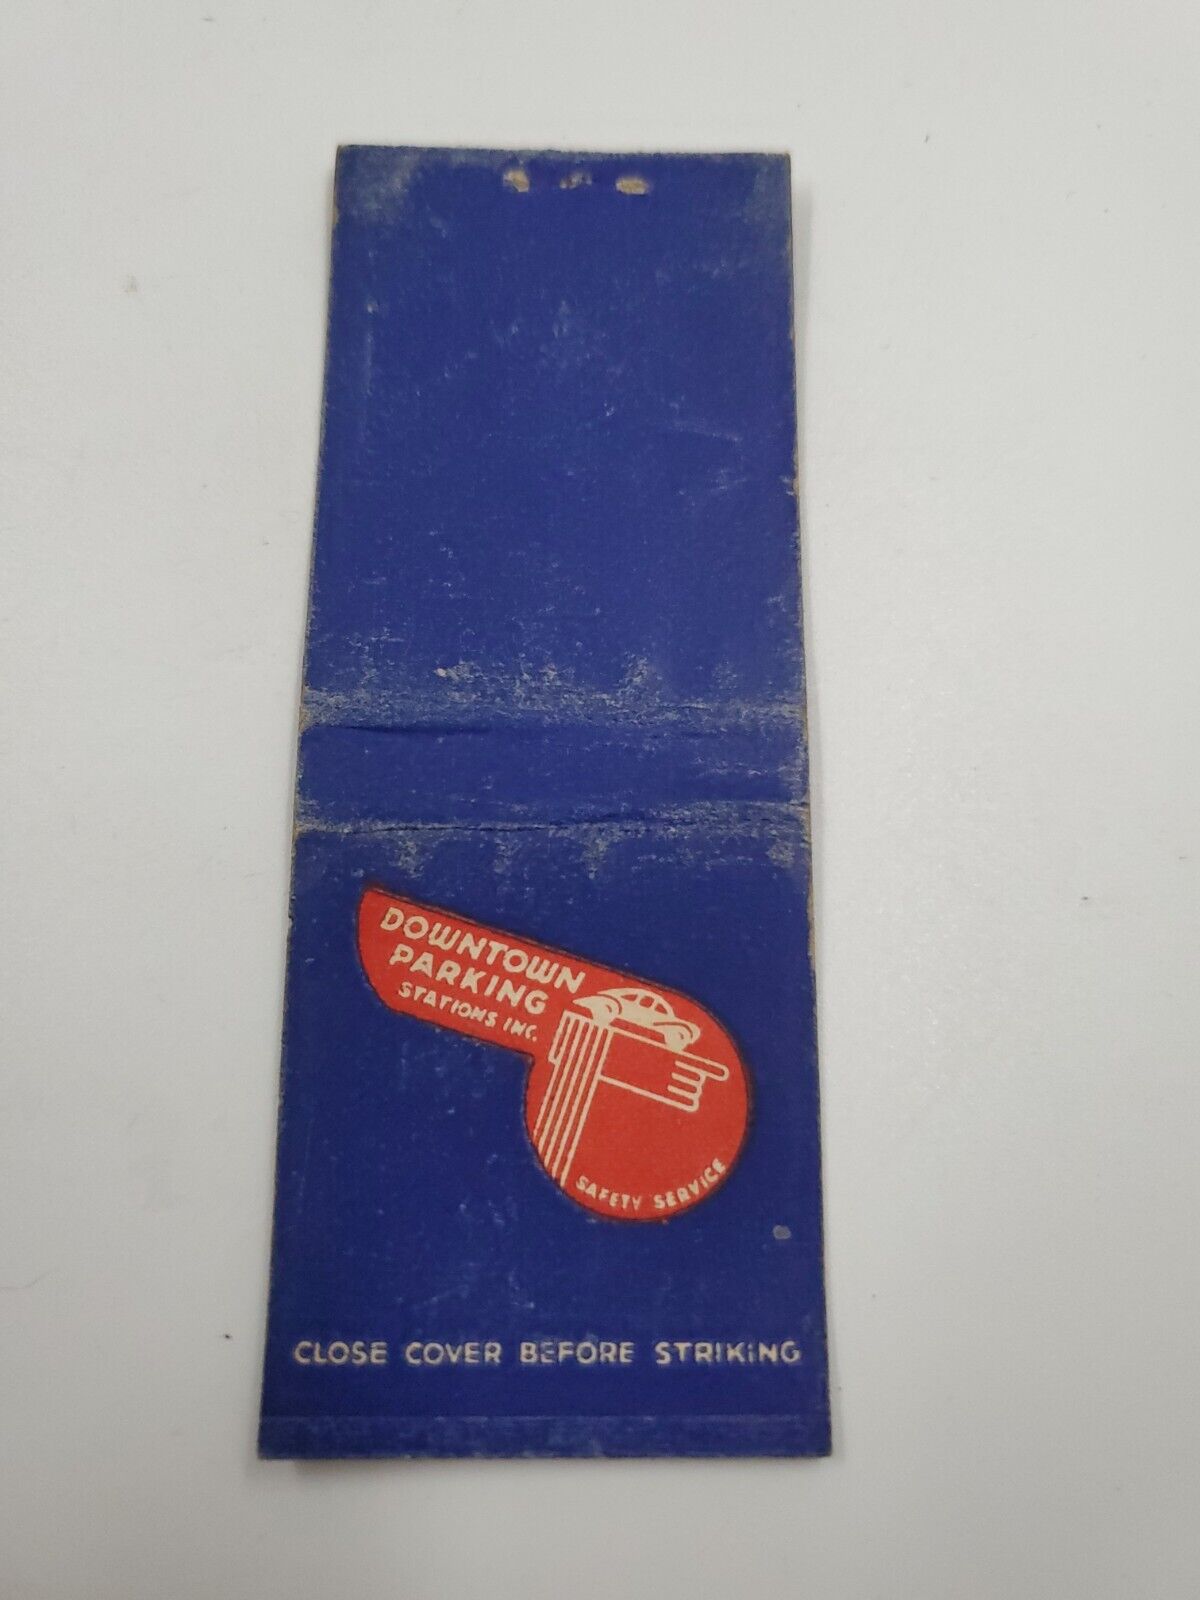 Downtown Parking Stations Chicago Illinois Locations Matchbook Cover